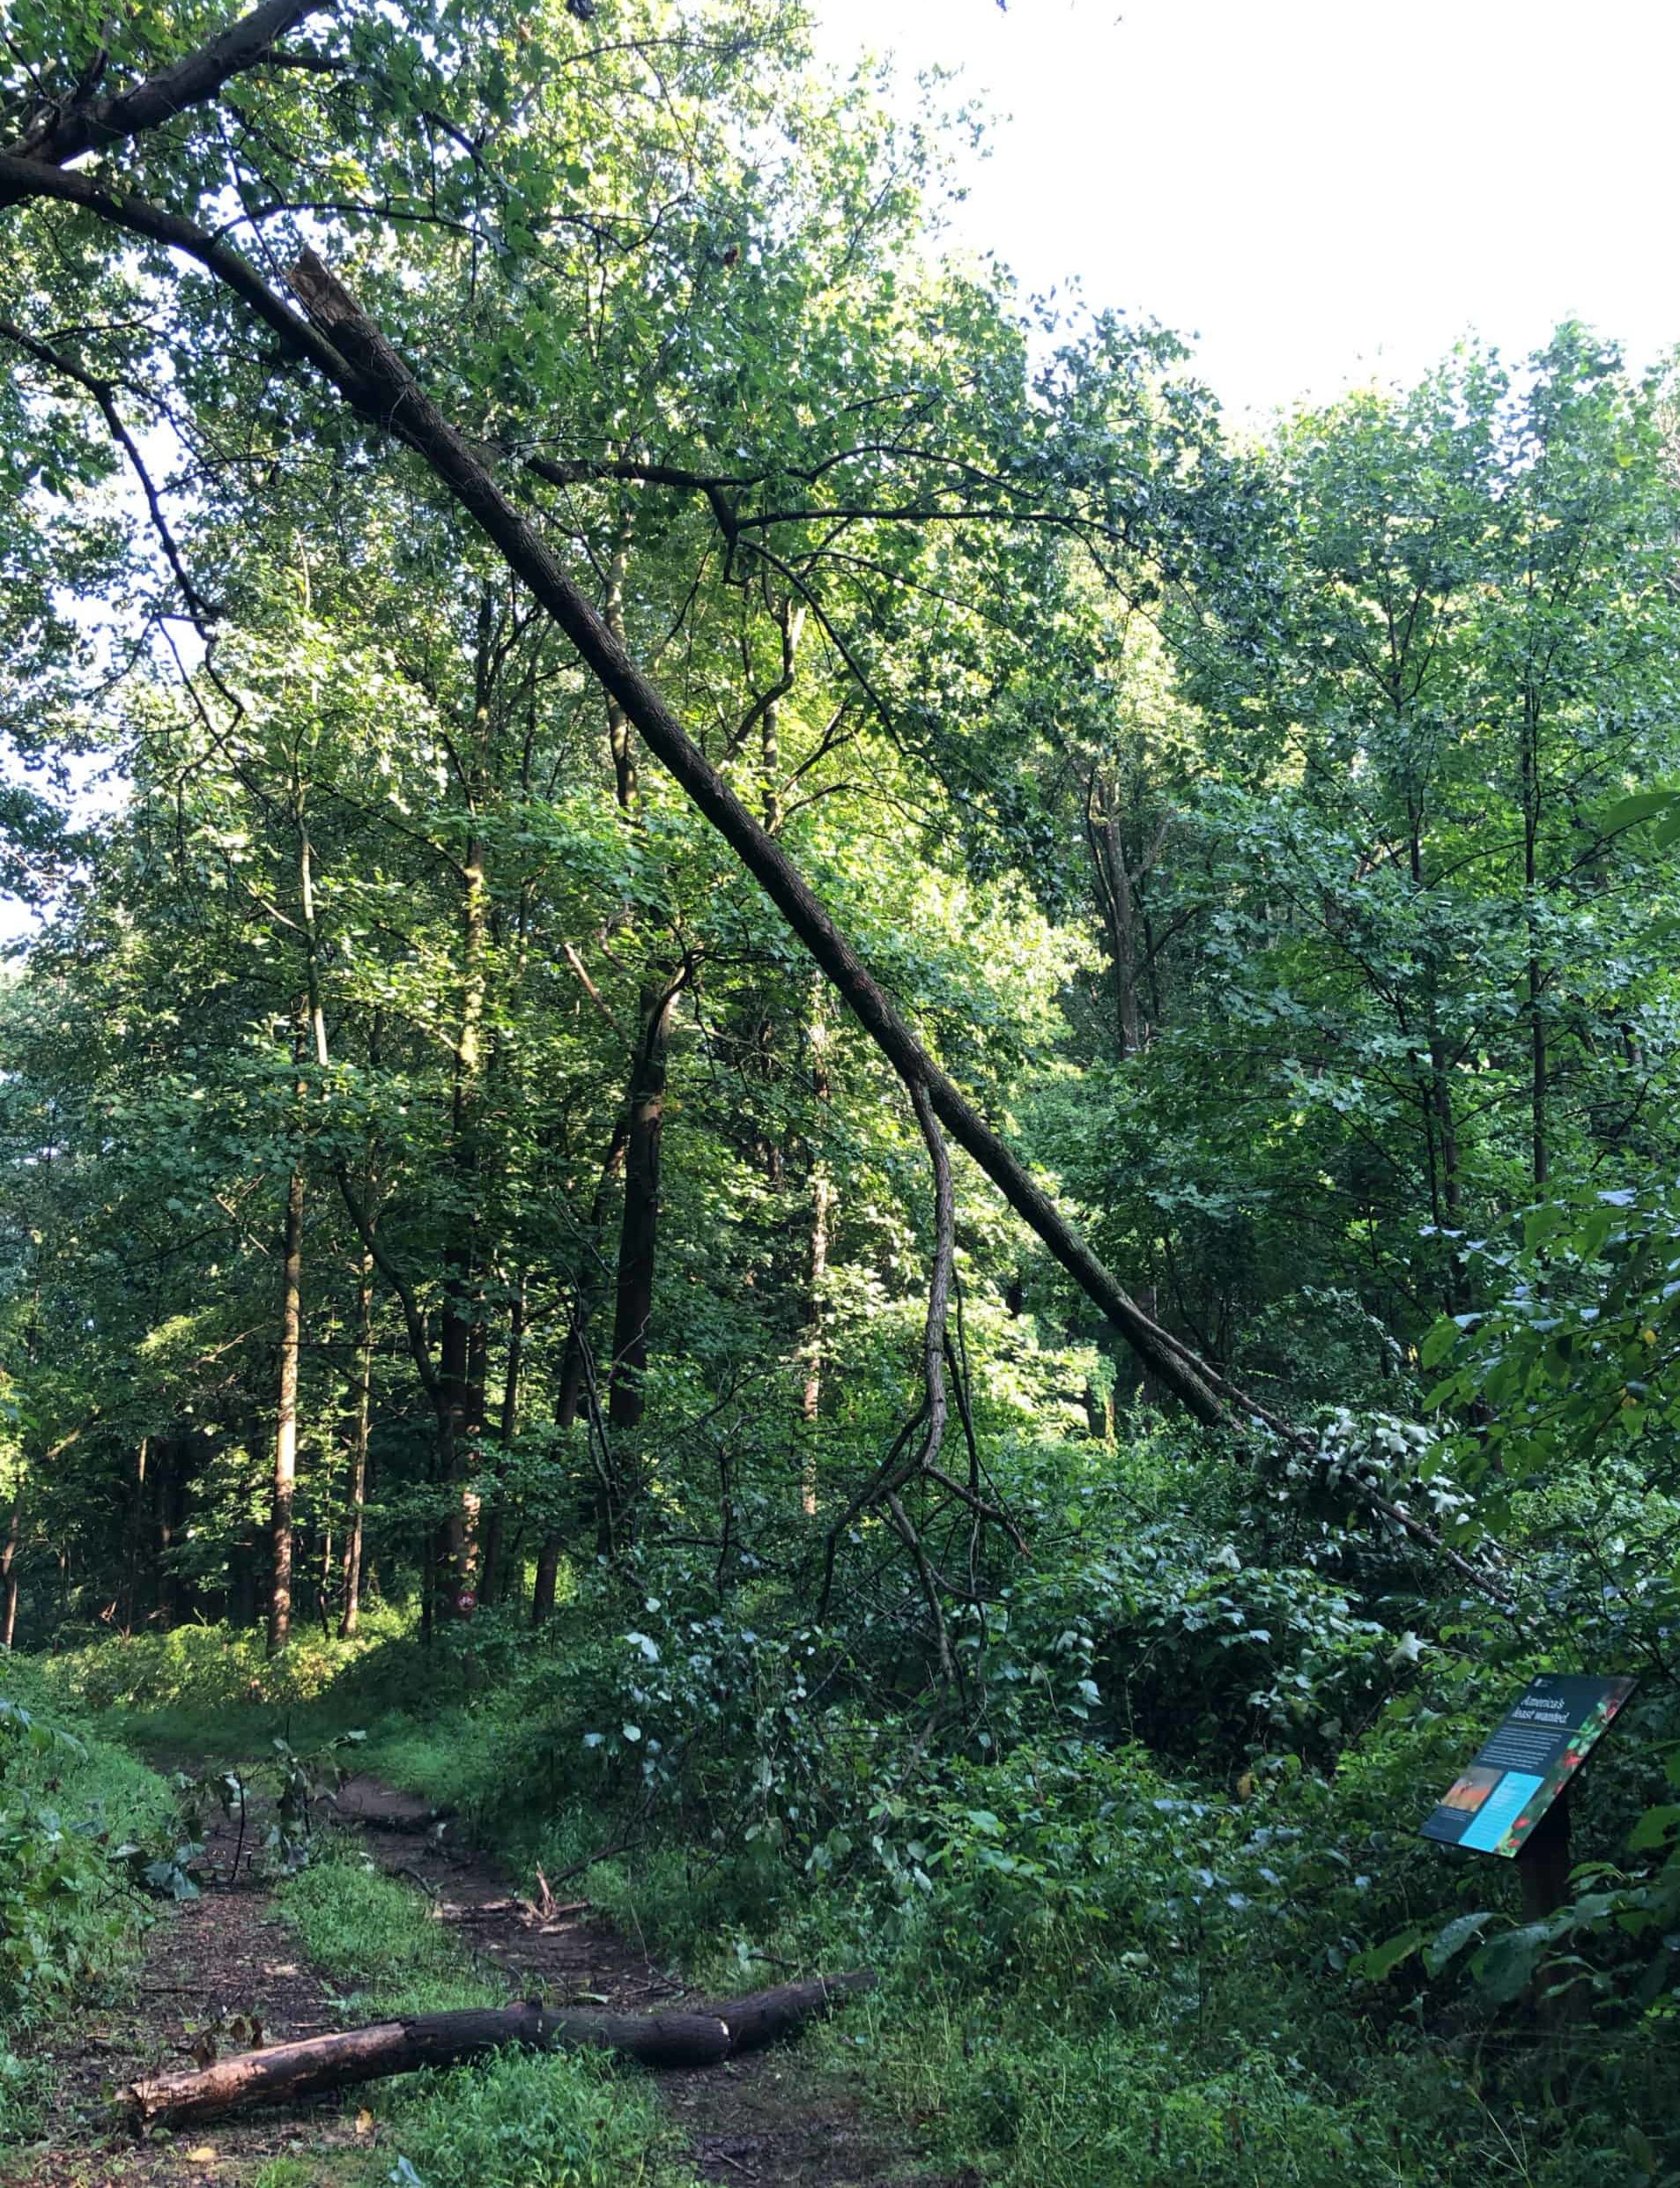 A broken branch hanging over a trail